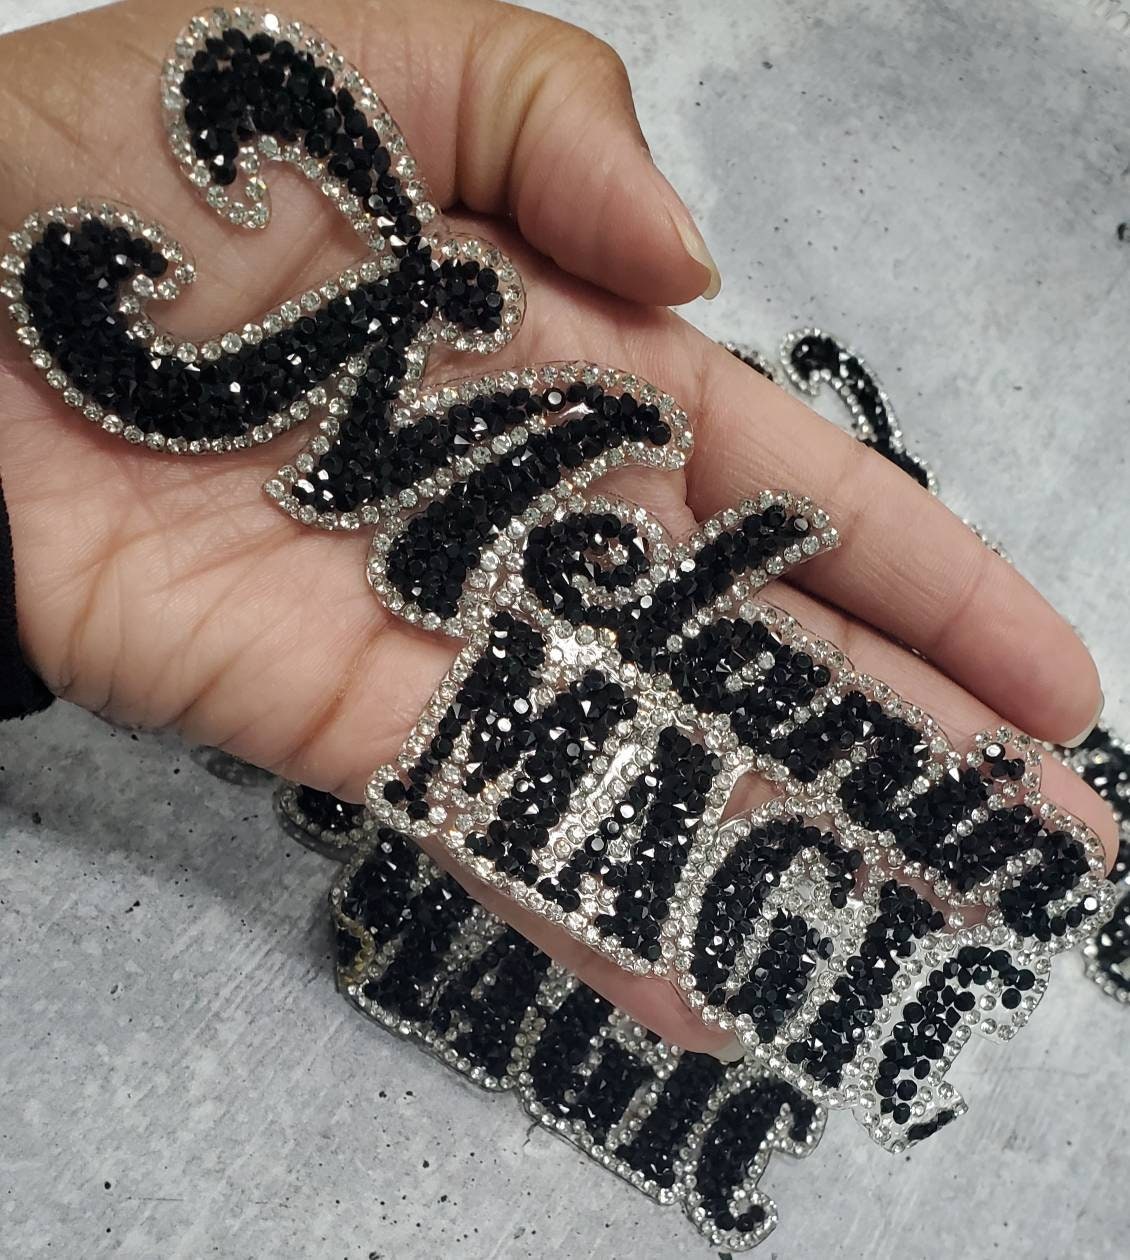 NEW Arrival, Blinged Out "Melanin Magic" Rhinestone Patch with Adhesive, Rhinestone Applique, Size 6"x2", Czech Rhinestones, DIY Applique